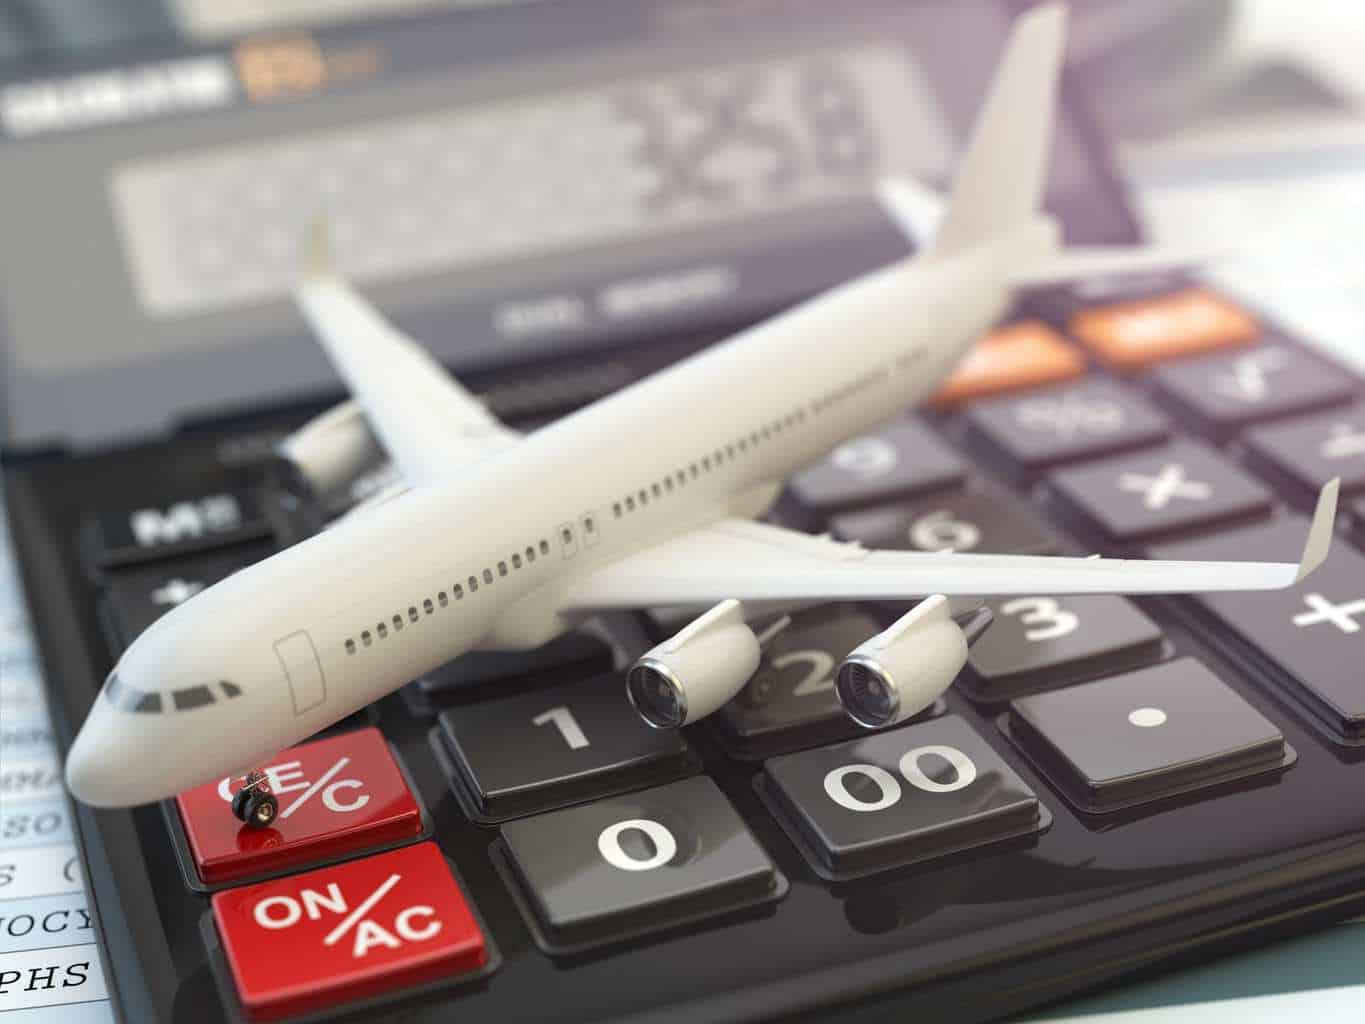 Flight booking tips: How to find cheap flights to practically anywhere?